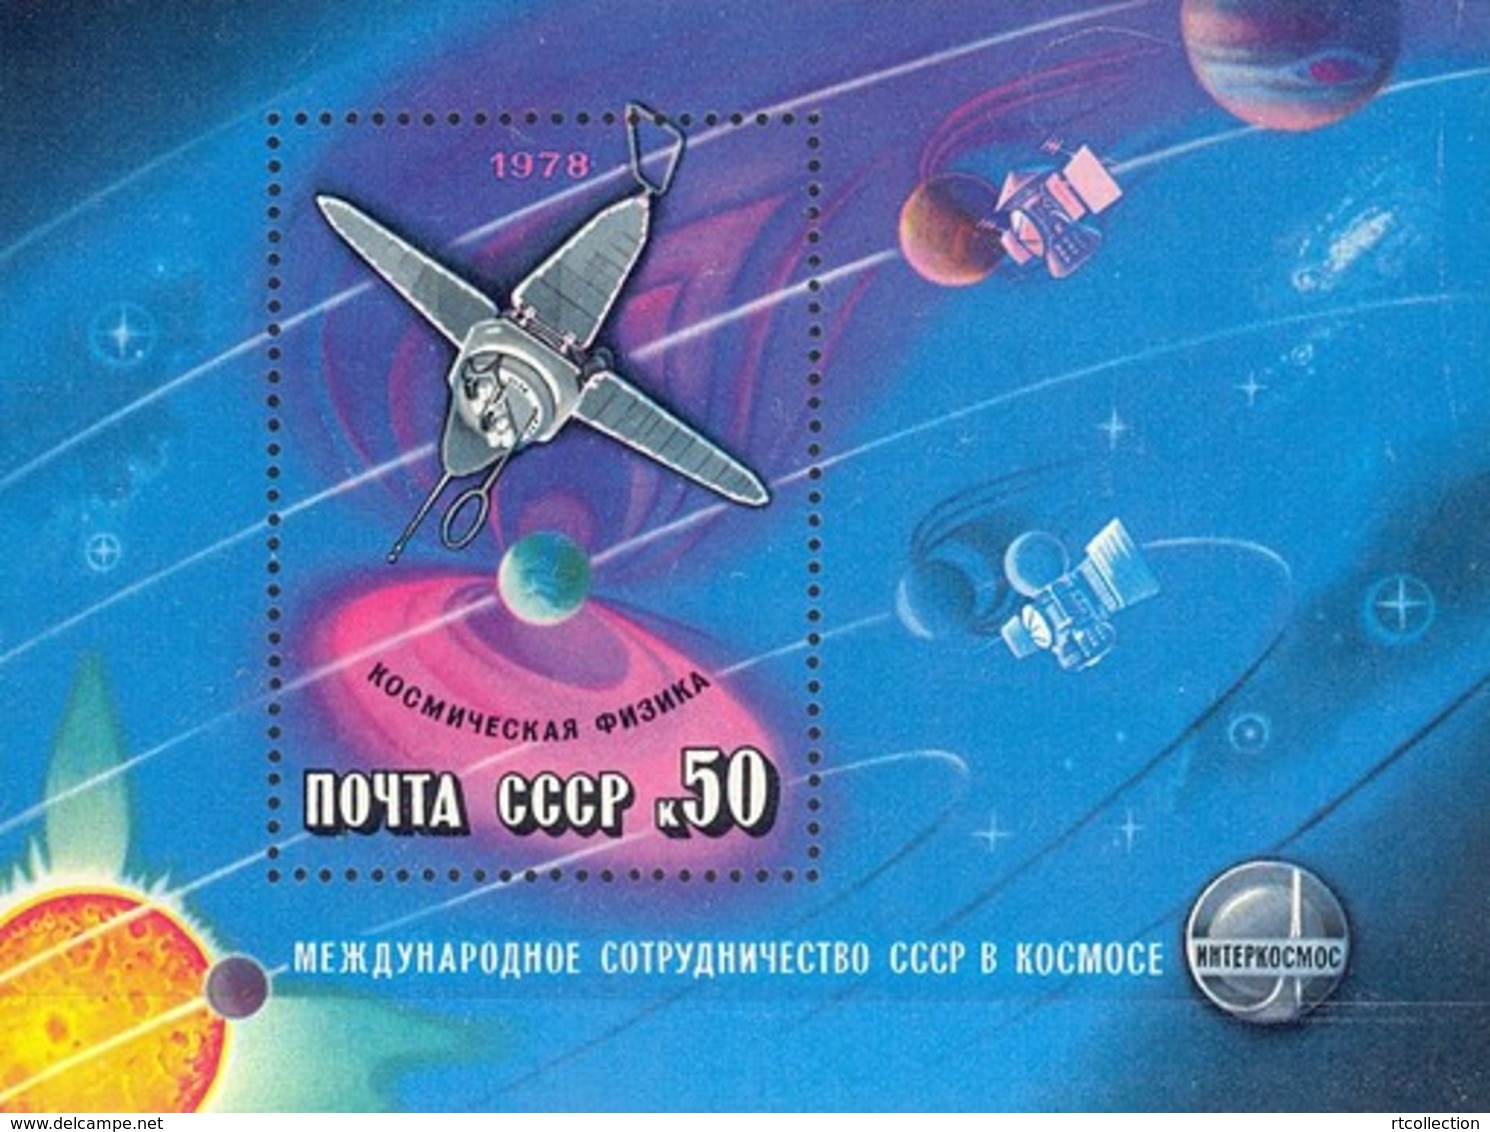 USSR Russia 1978 International Space Cooperation Exploration Intercosmos Program Sciences S/S Stamp MNH Mi 4734 BL129 - Russia & USSR